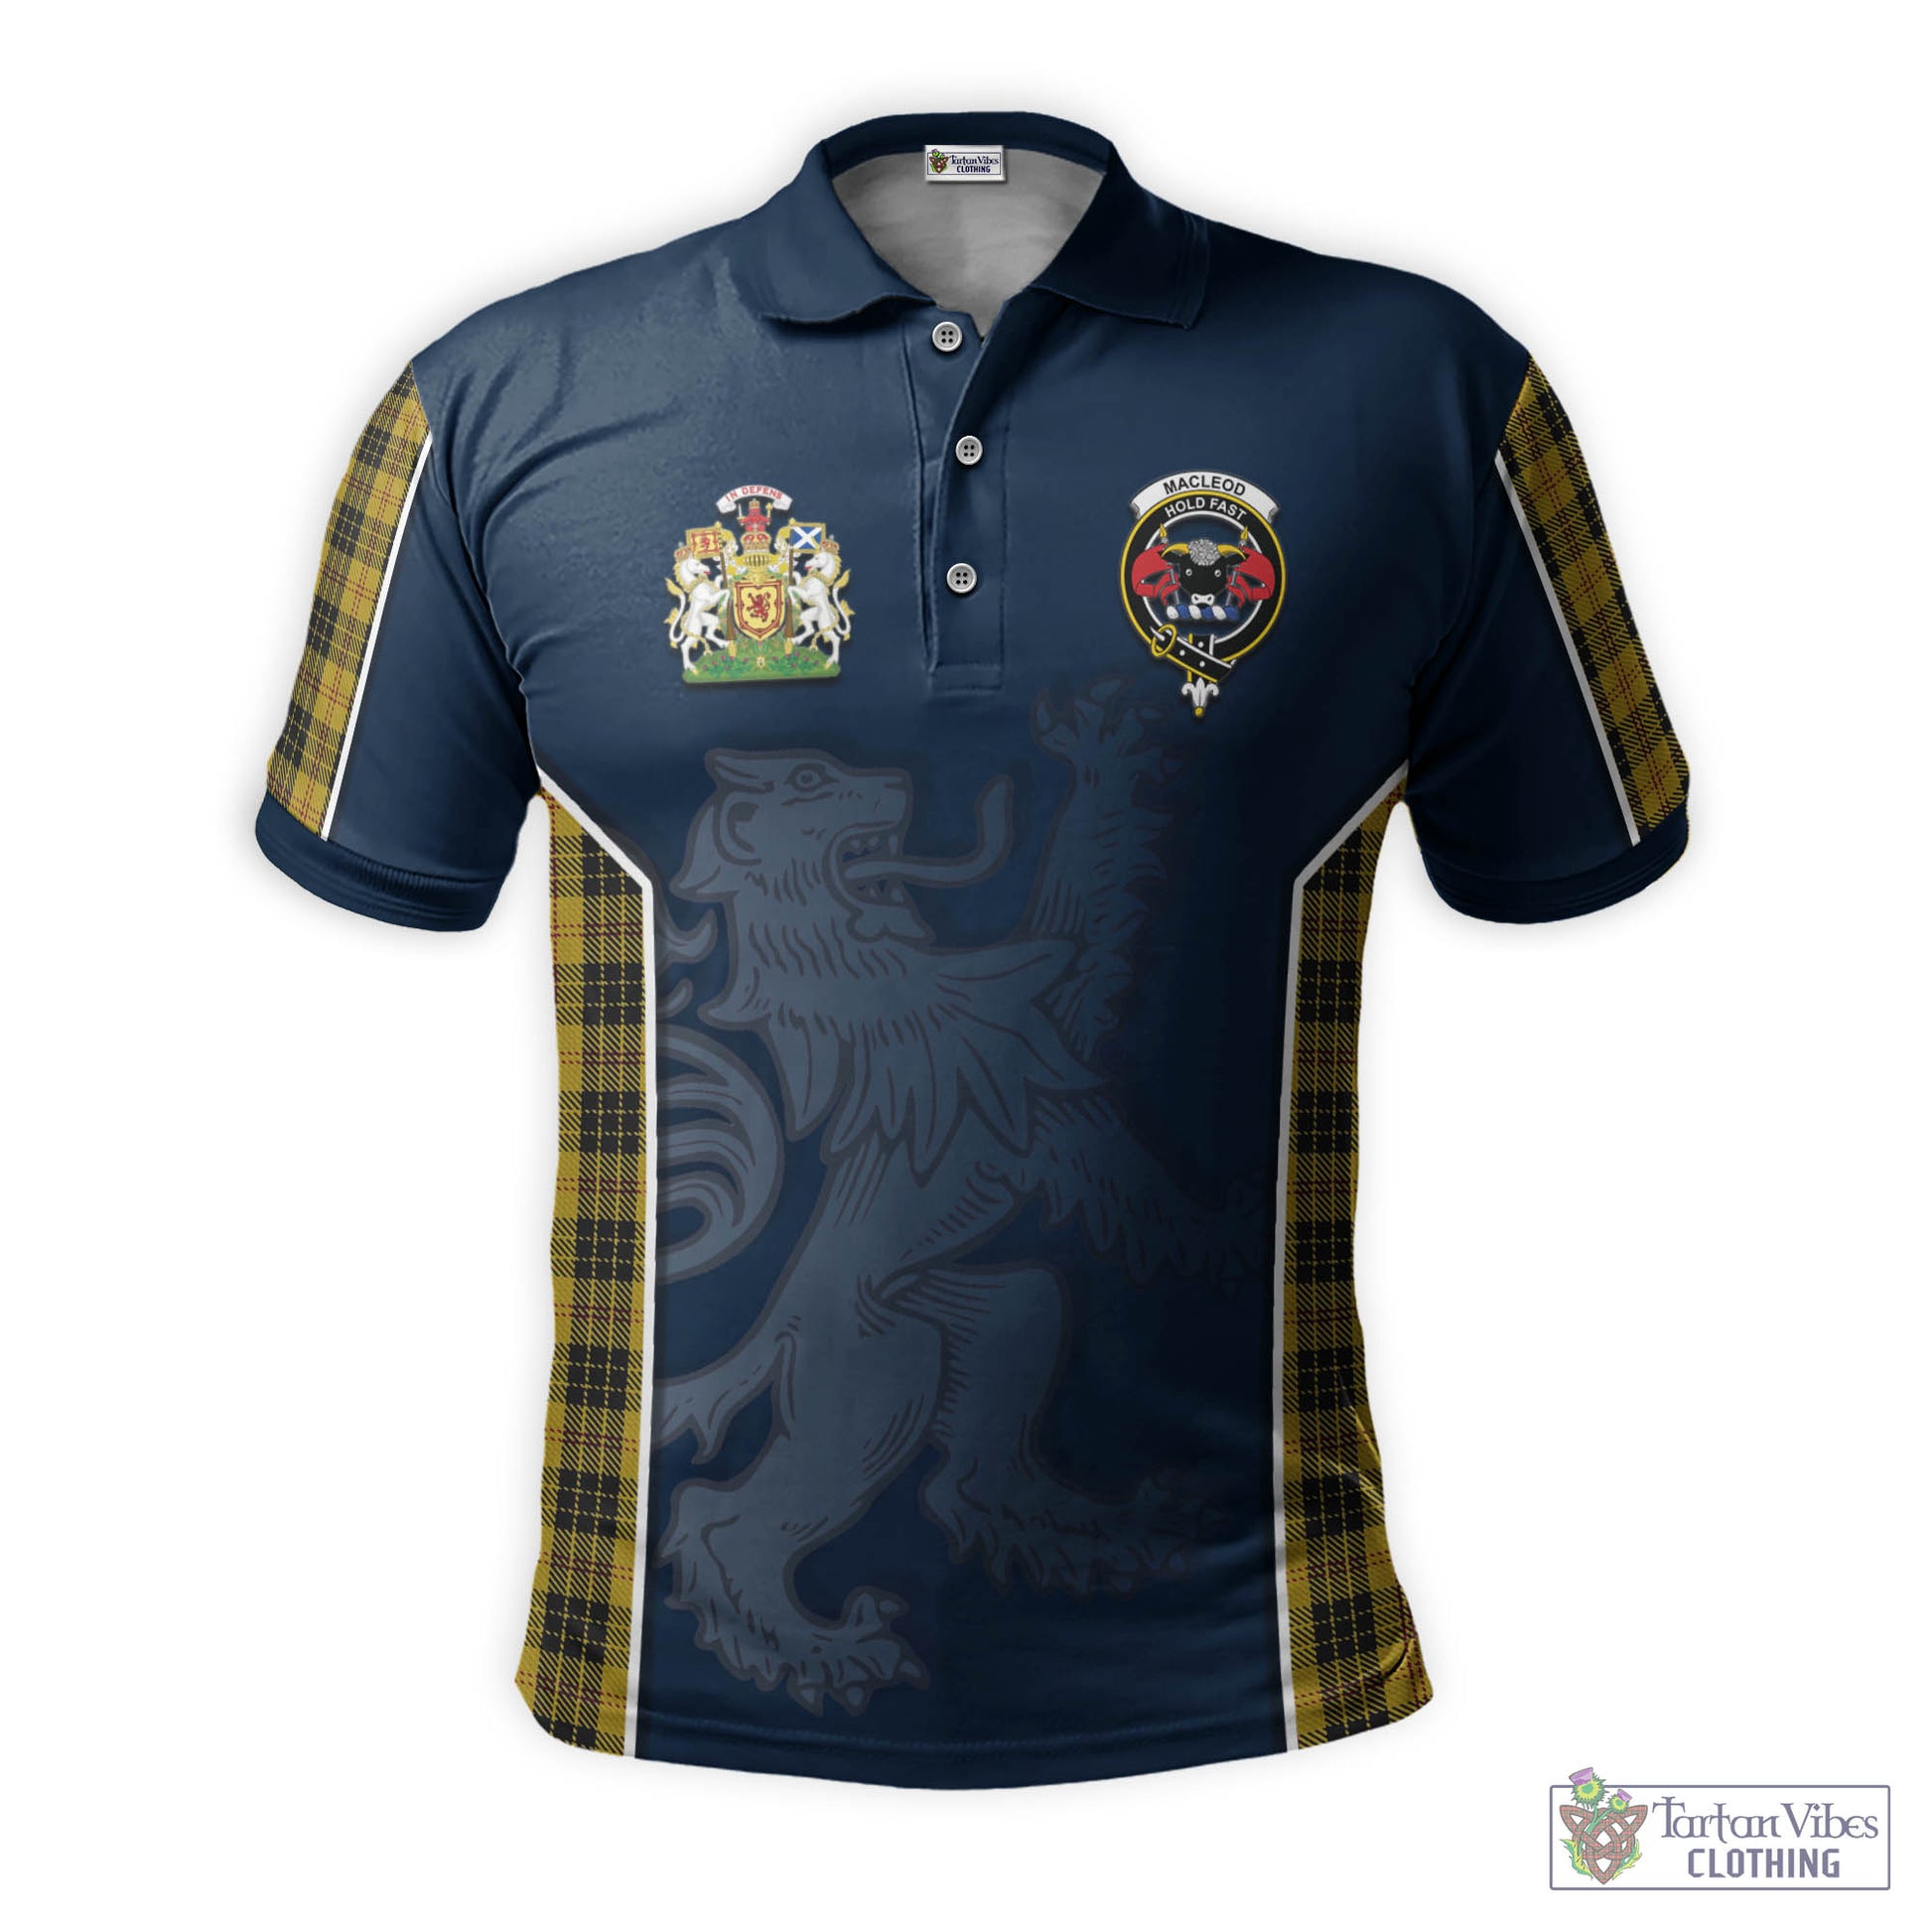 Tartan Vibes Clothing MacLeod Tartan Men's Polo Shirt with Family Crest and Lion Rampant Vibes Sport Style